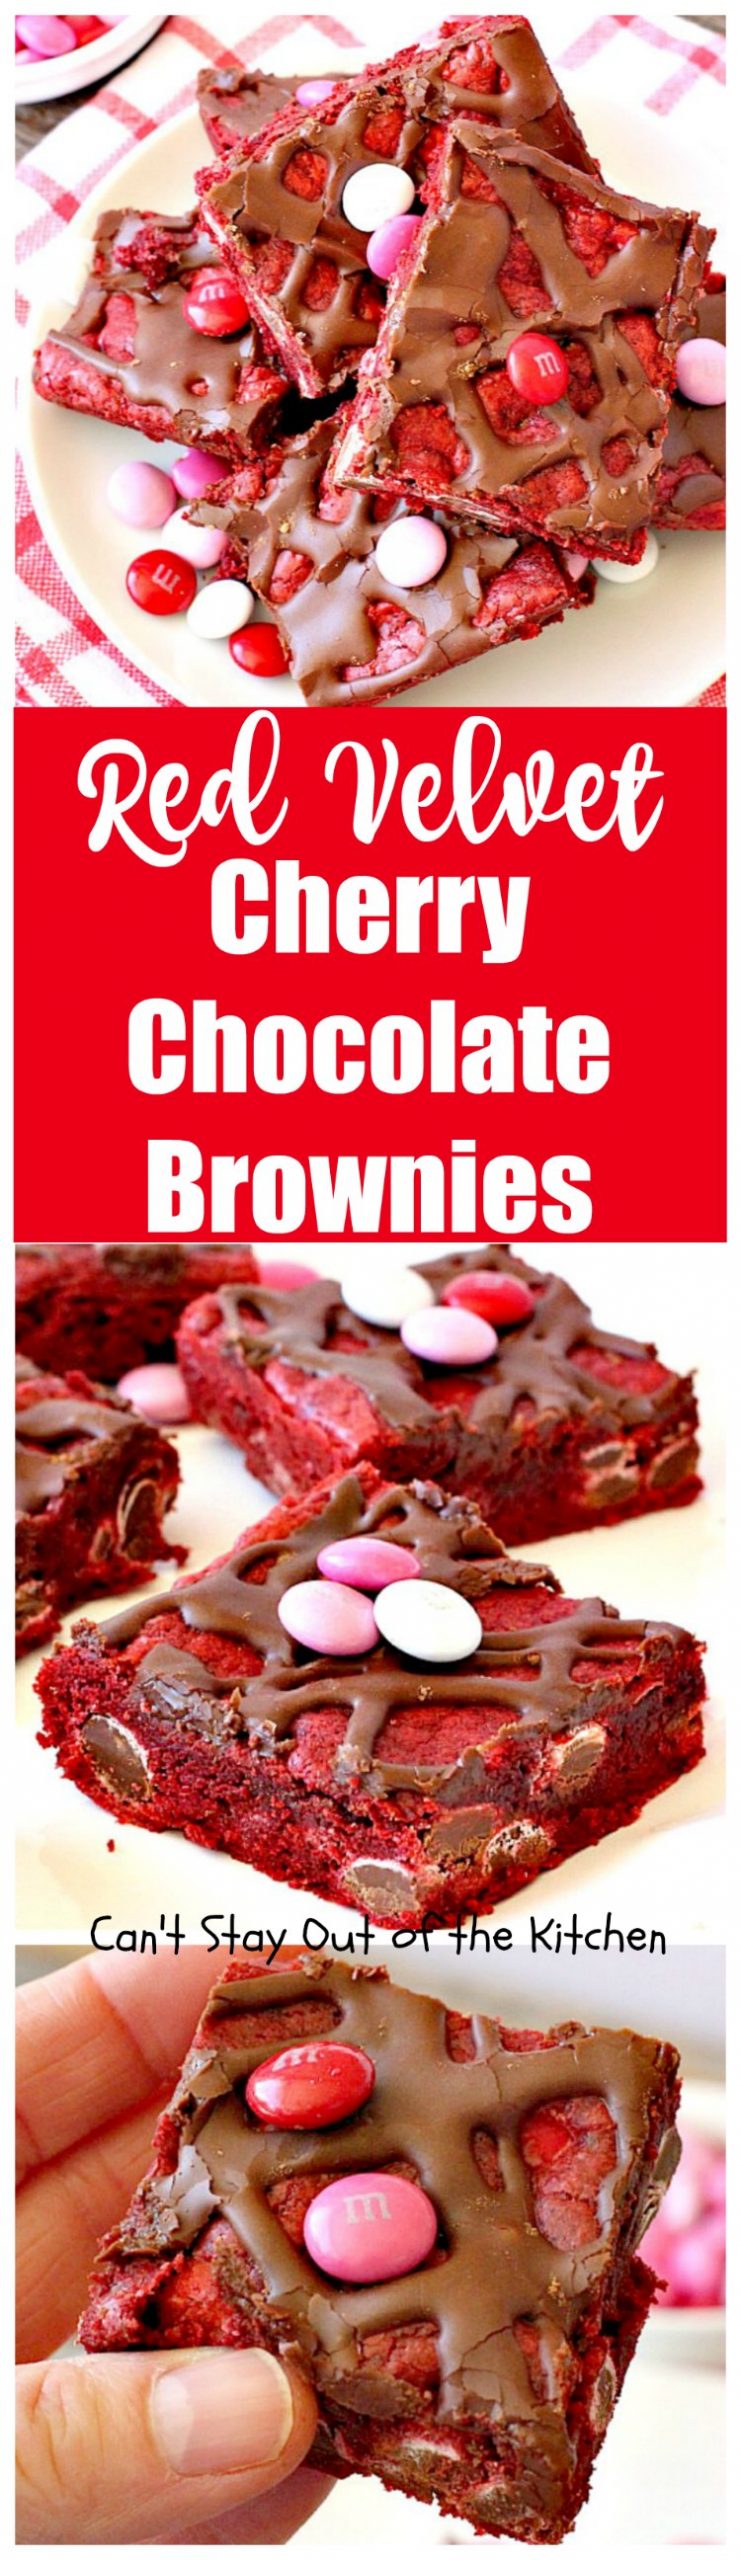 Red Velvet Cherry Chocolate Brownies | Can't Stay Out of the Kitchen